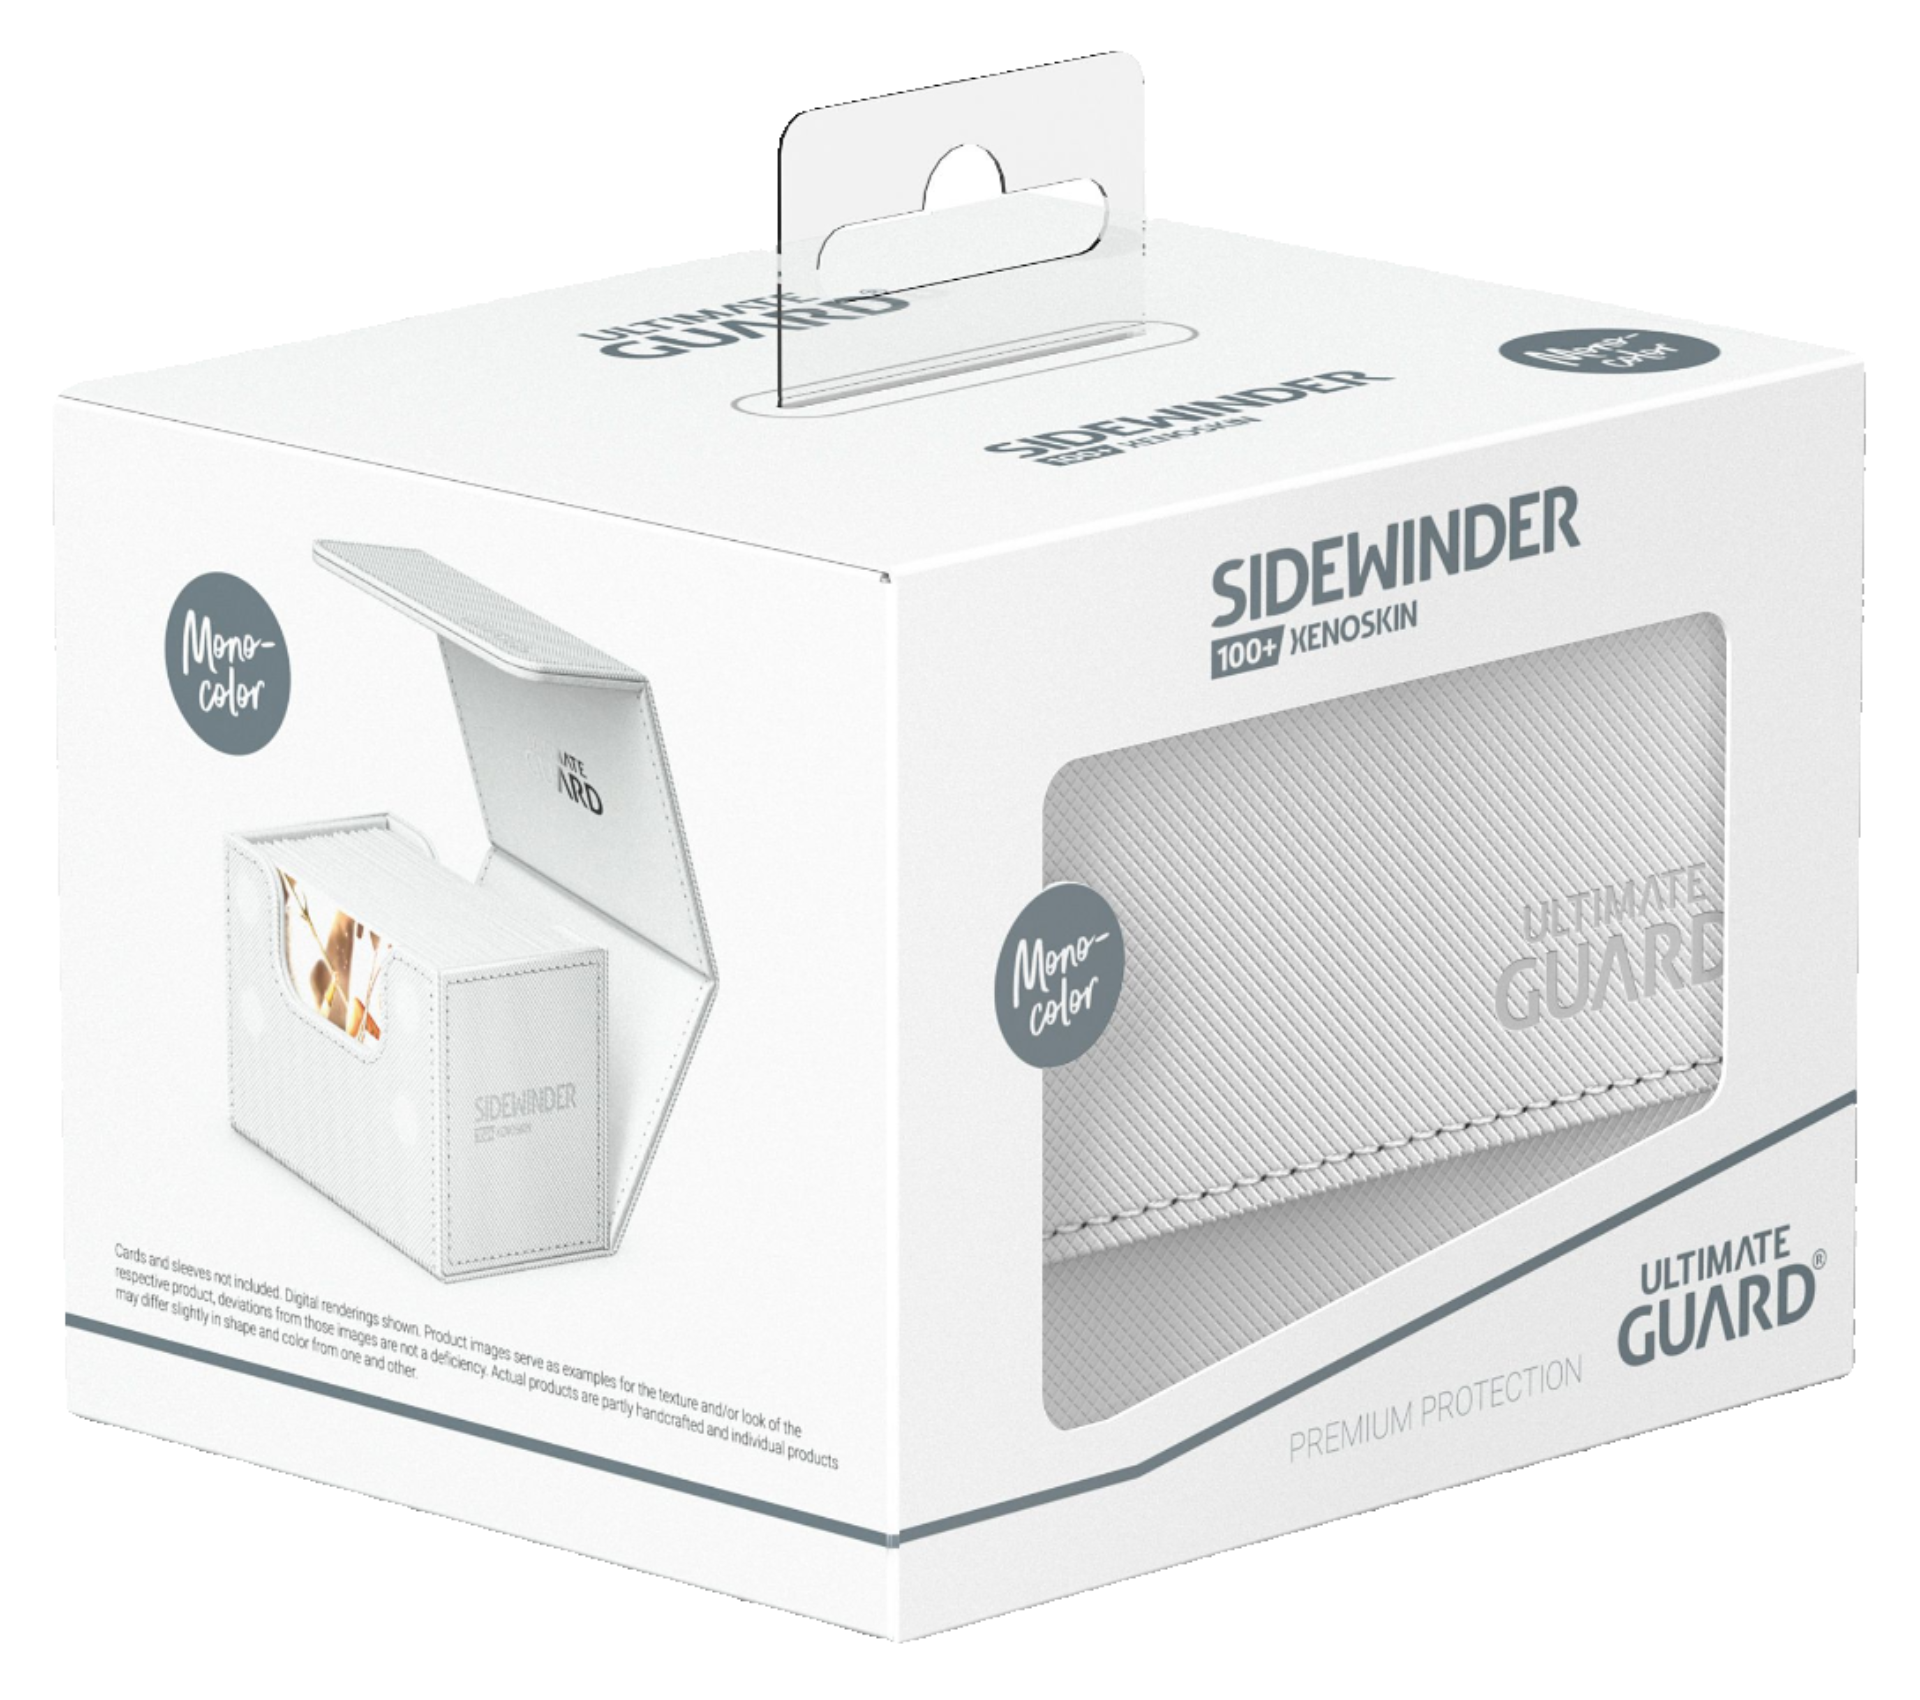 Ultimate Guard - Sidewinder XenoSkin - 100+ Deck Case - Monocolor While